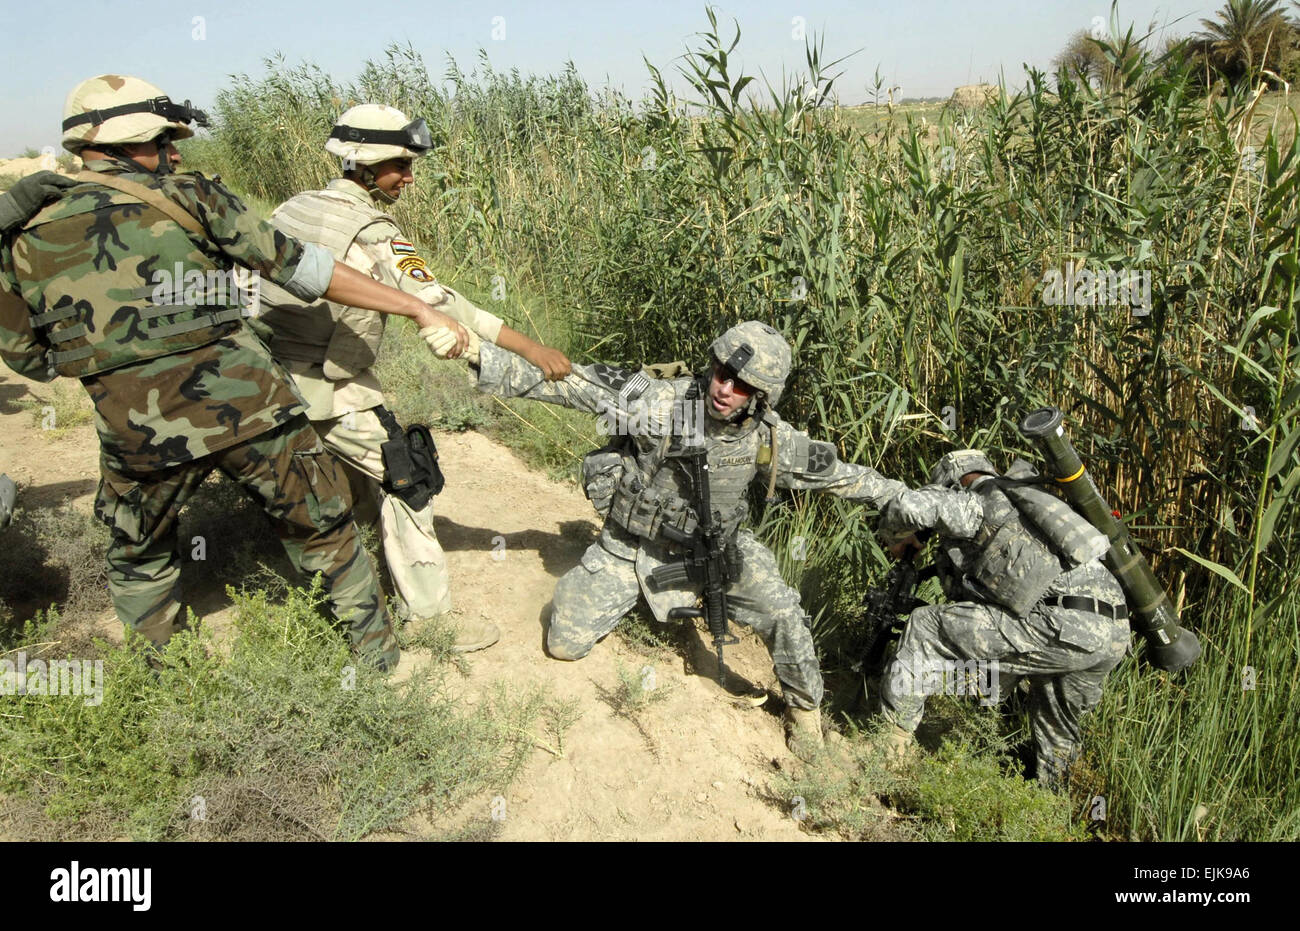 U.S. Army Sgt. Steven Calhoun is assisted by Iraqi army soldiers in pulling out a Soldier after he fell into an irrigation ditch during a joint mission in Khan Bani Sa'ad, Iraq, July 12, 2007.  Soldiers from Alpha Battery, 2nd Battalion, 12th Field Artillery Regiment, 4th Stryker Brigade Combat Team, 2nd Infantry Division and units of the Iraqi army are conducting a cordon and search mission to clear the area of insurgents and cache sites.  Mass Communication Specialist 2nd Class Scott Taylor Stock Photo